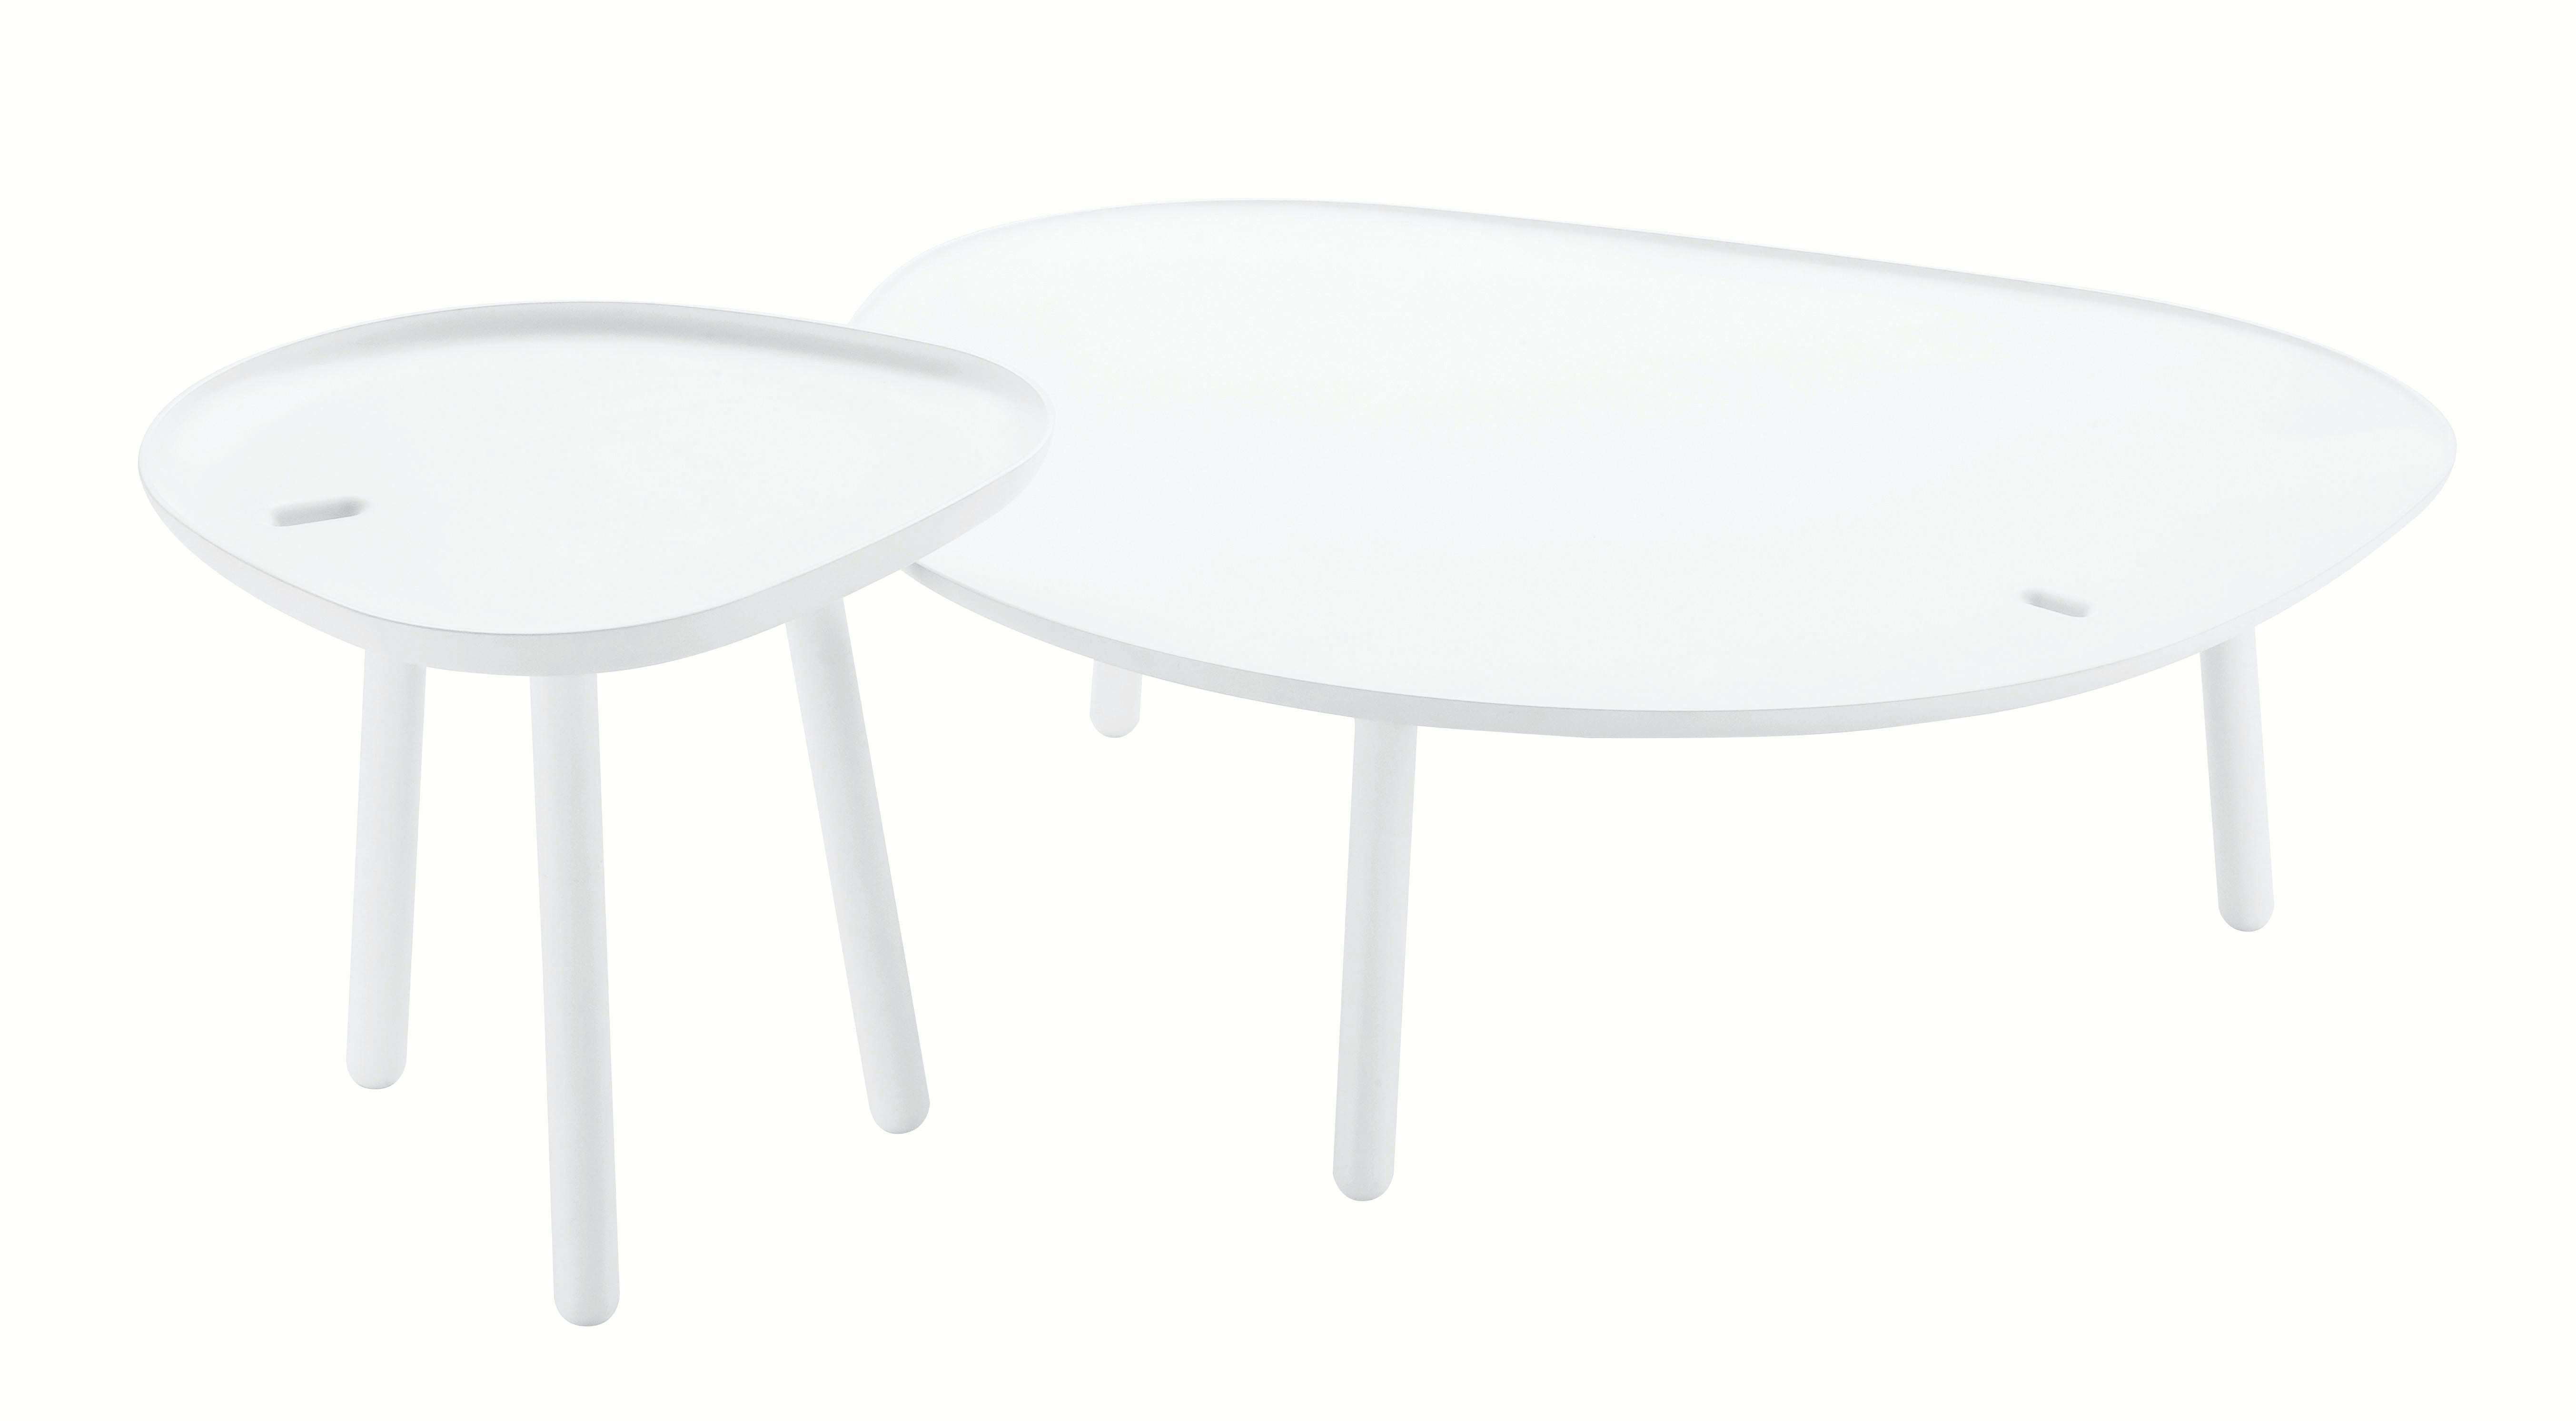 Zanotta Ninfea Small Table in White Acrylic Resin by Ludovica+Roberto Palomba

Top and legs in Cristalplant outdoor®, composite material based on polyester and acrylic resins loaded with minerals and mass pigmented in the shade of matt